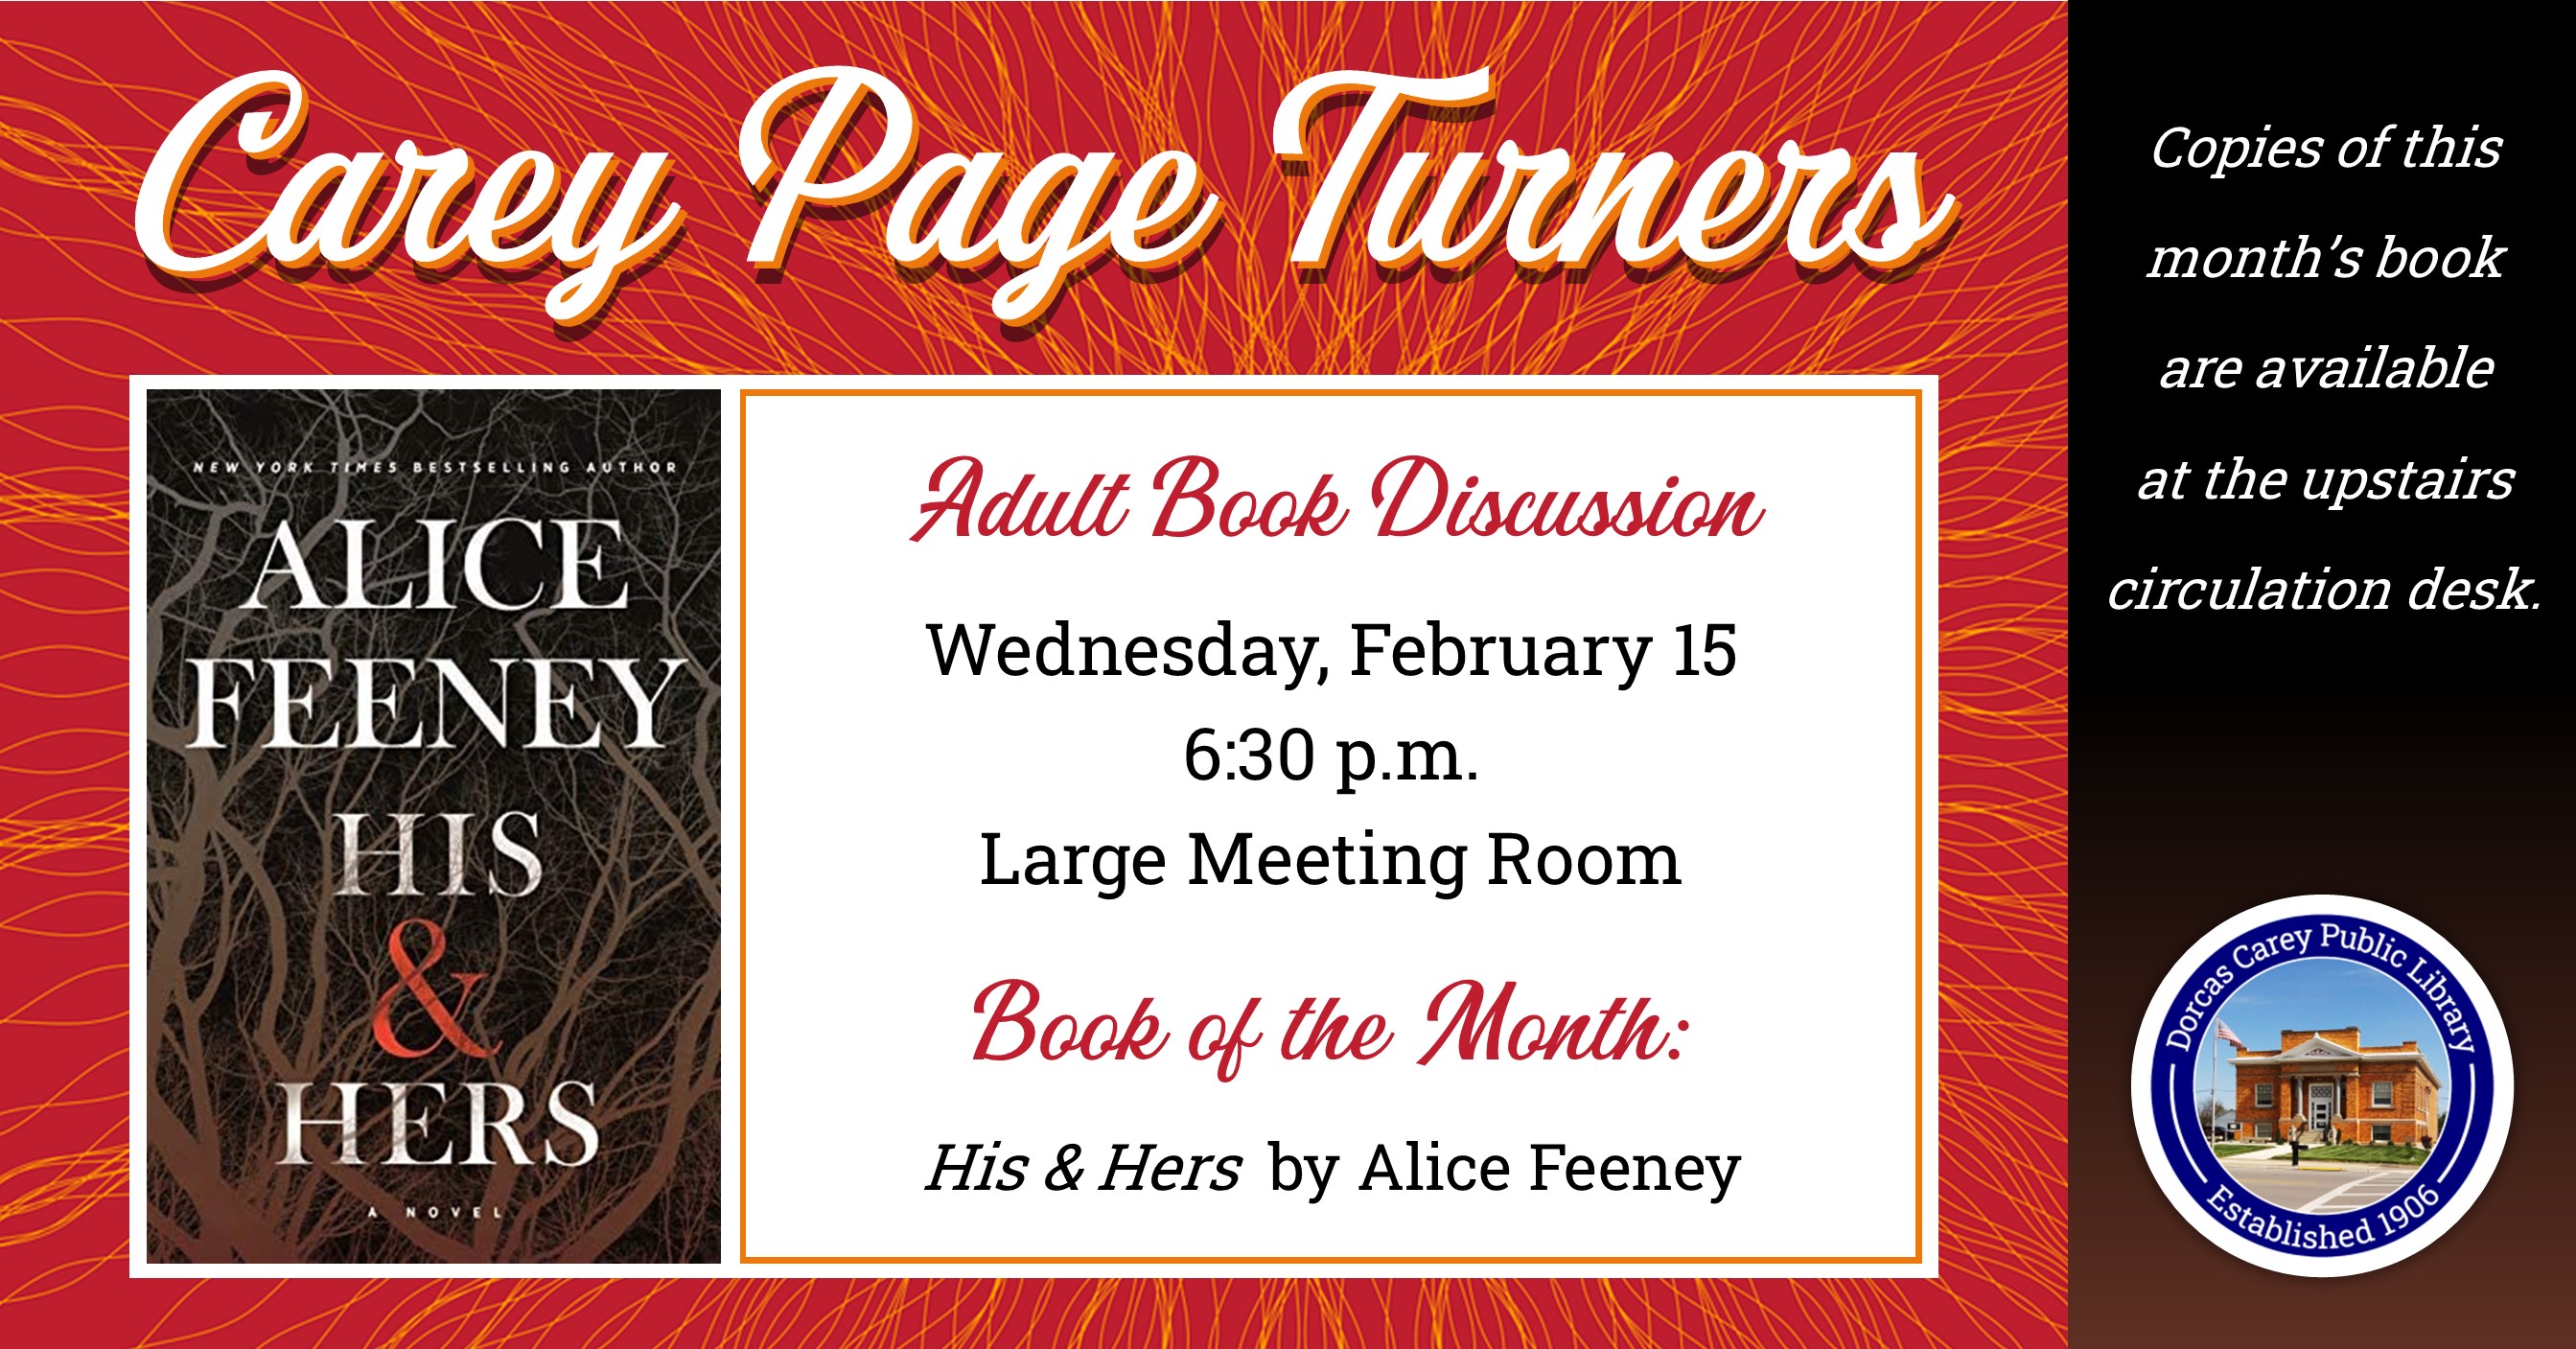 The Carey Page Turners will meet on Wednesday, February 15th at 6:30 p.m. to discuss the book:  His & Hers by Alice Feeney.  When a woman is murdered in Blackdown, a quintessentially British village, newsreader Anna Andrews is reluctant to cover the case. Detective Jack Harper is suspicious of her involvement, until he becomes a suspect in his own murder investigation.  Someone isn’t telling the truth, and some secrets are worth killing to keep.